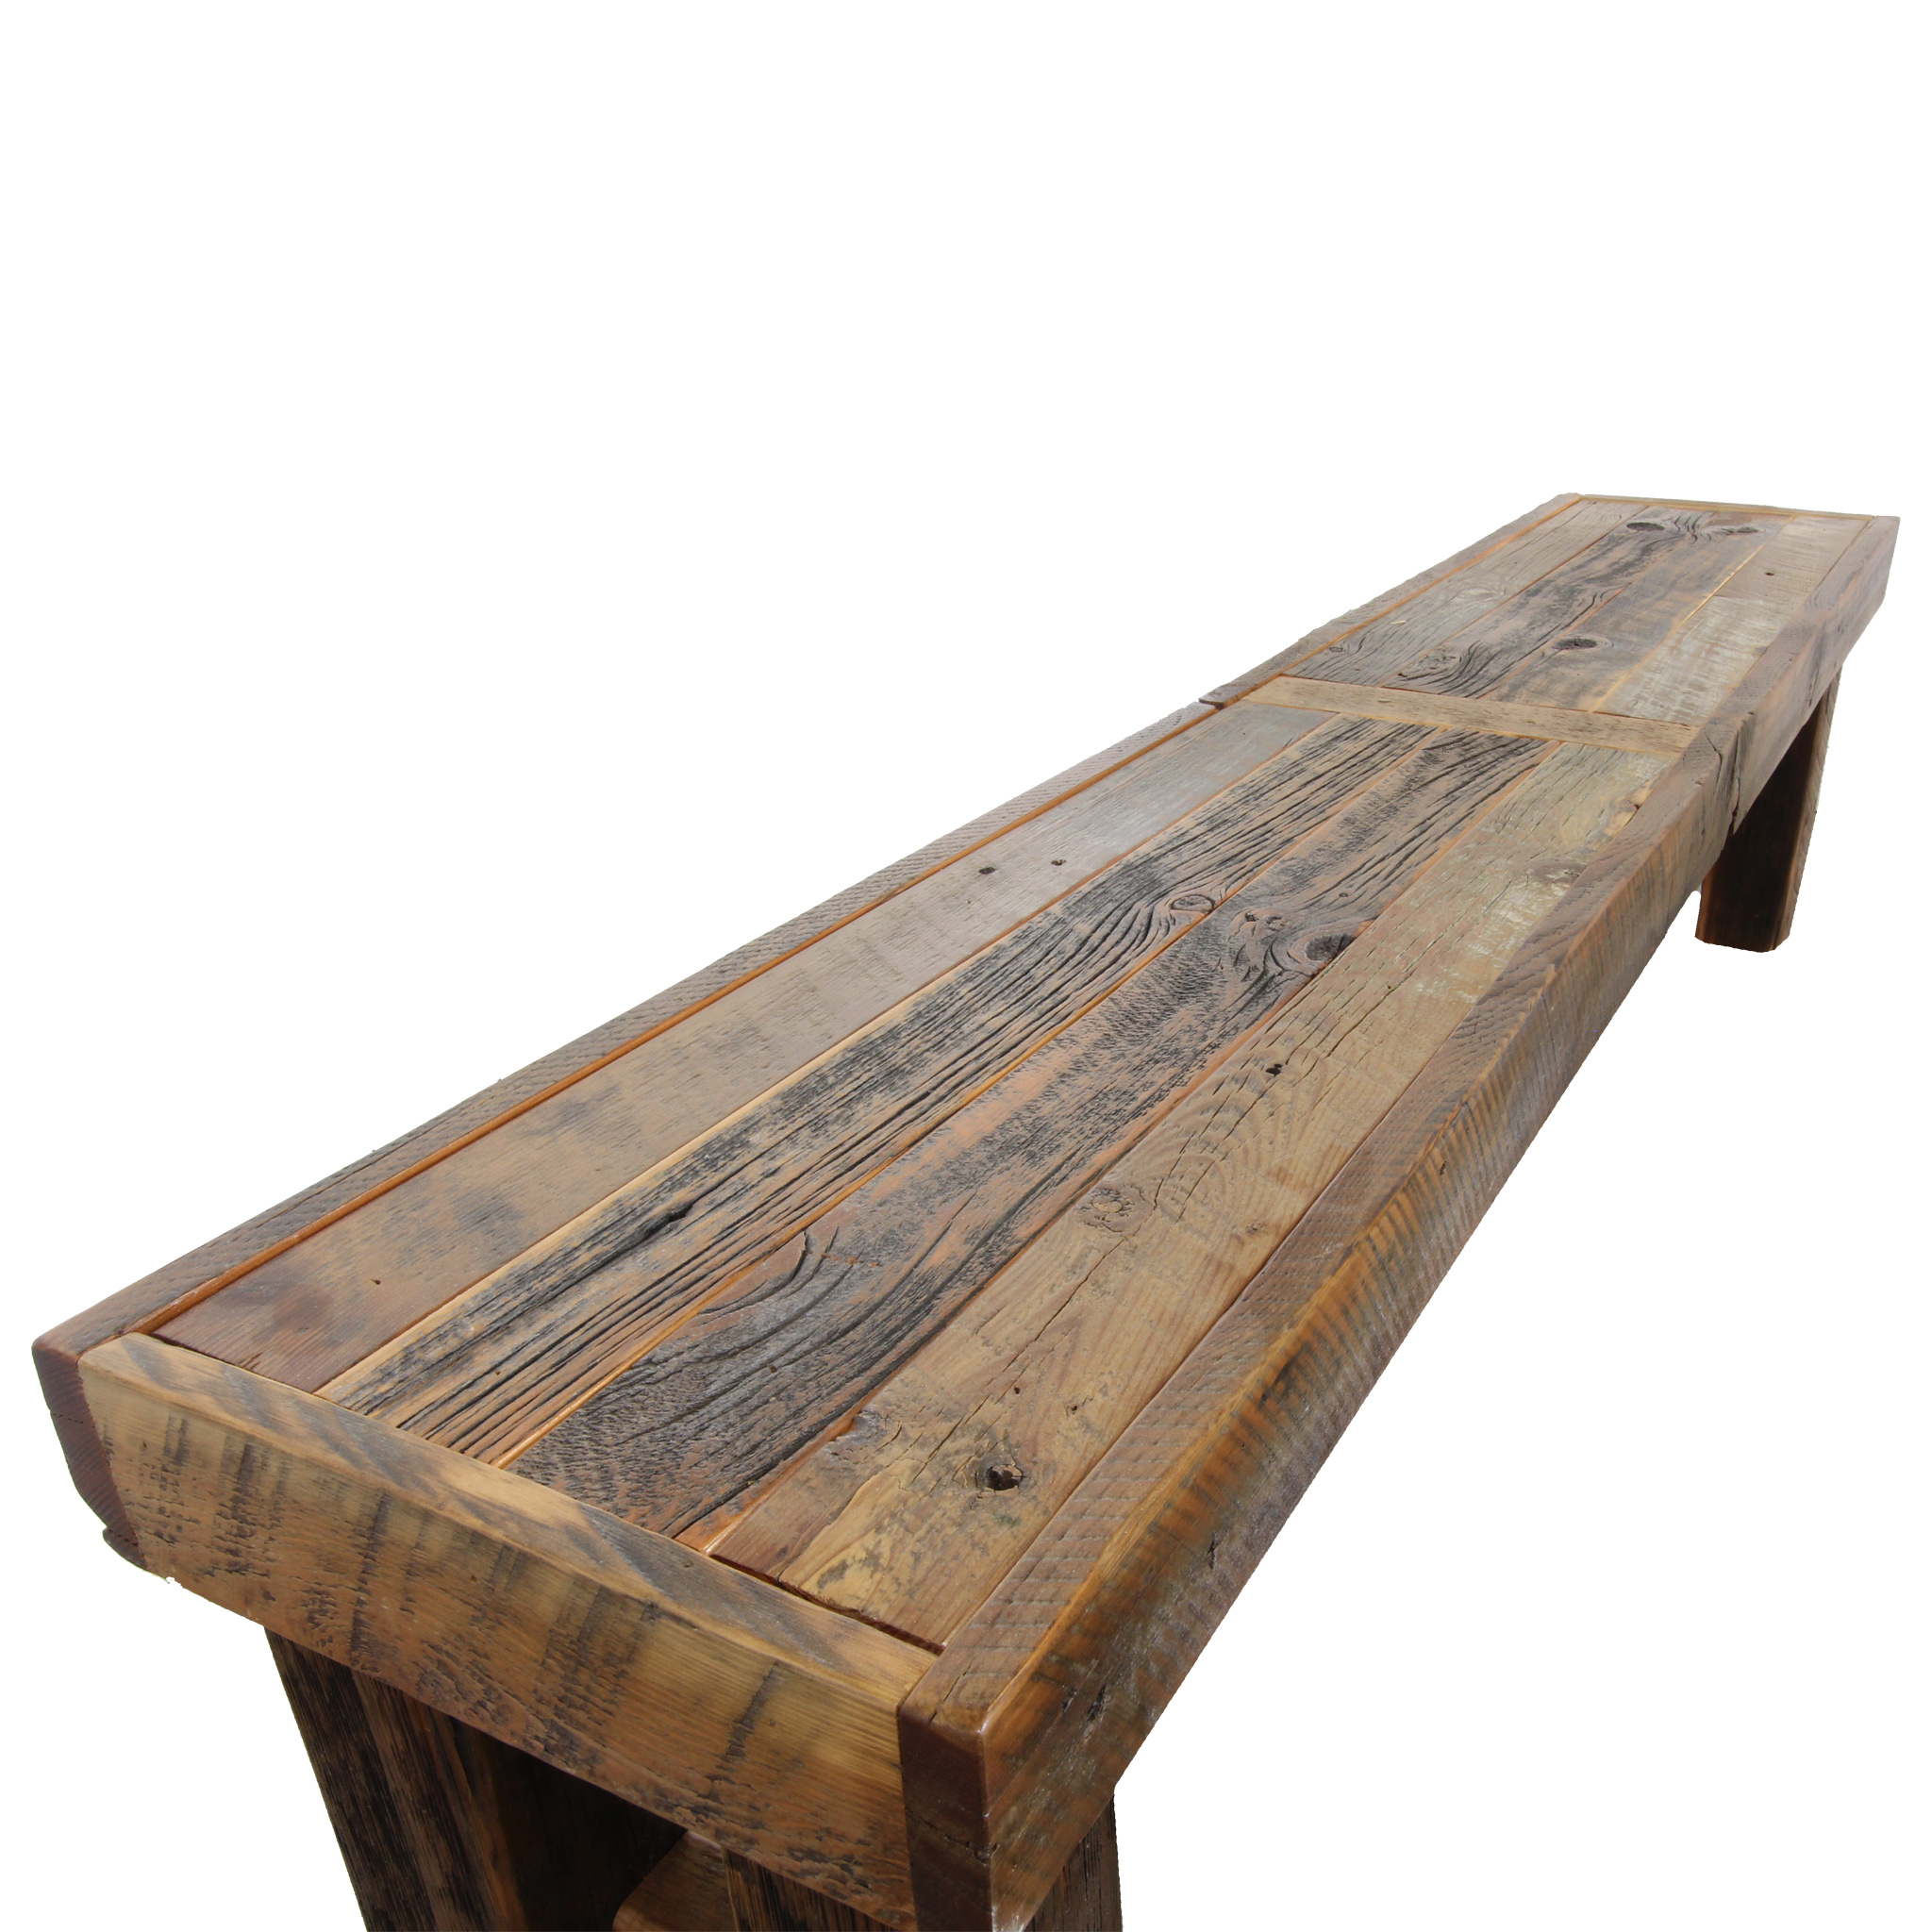 Rustic Reclaimed Timber Bench Big Timber Bw 2 